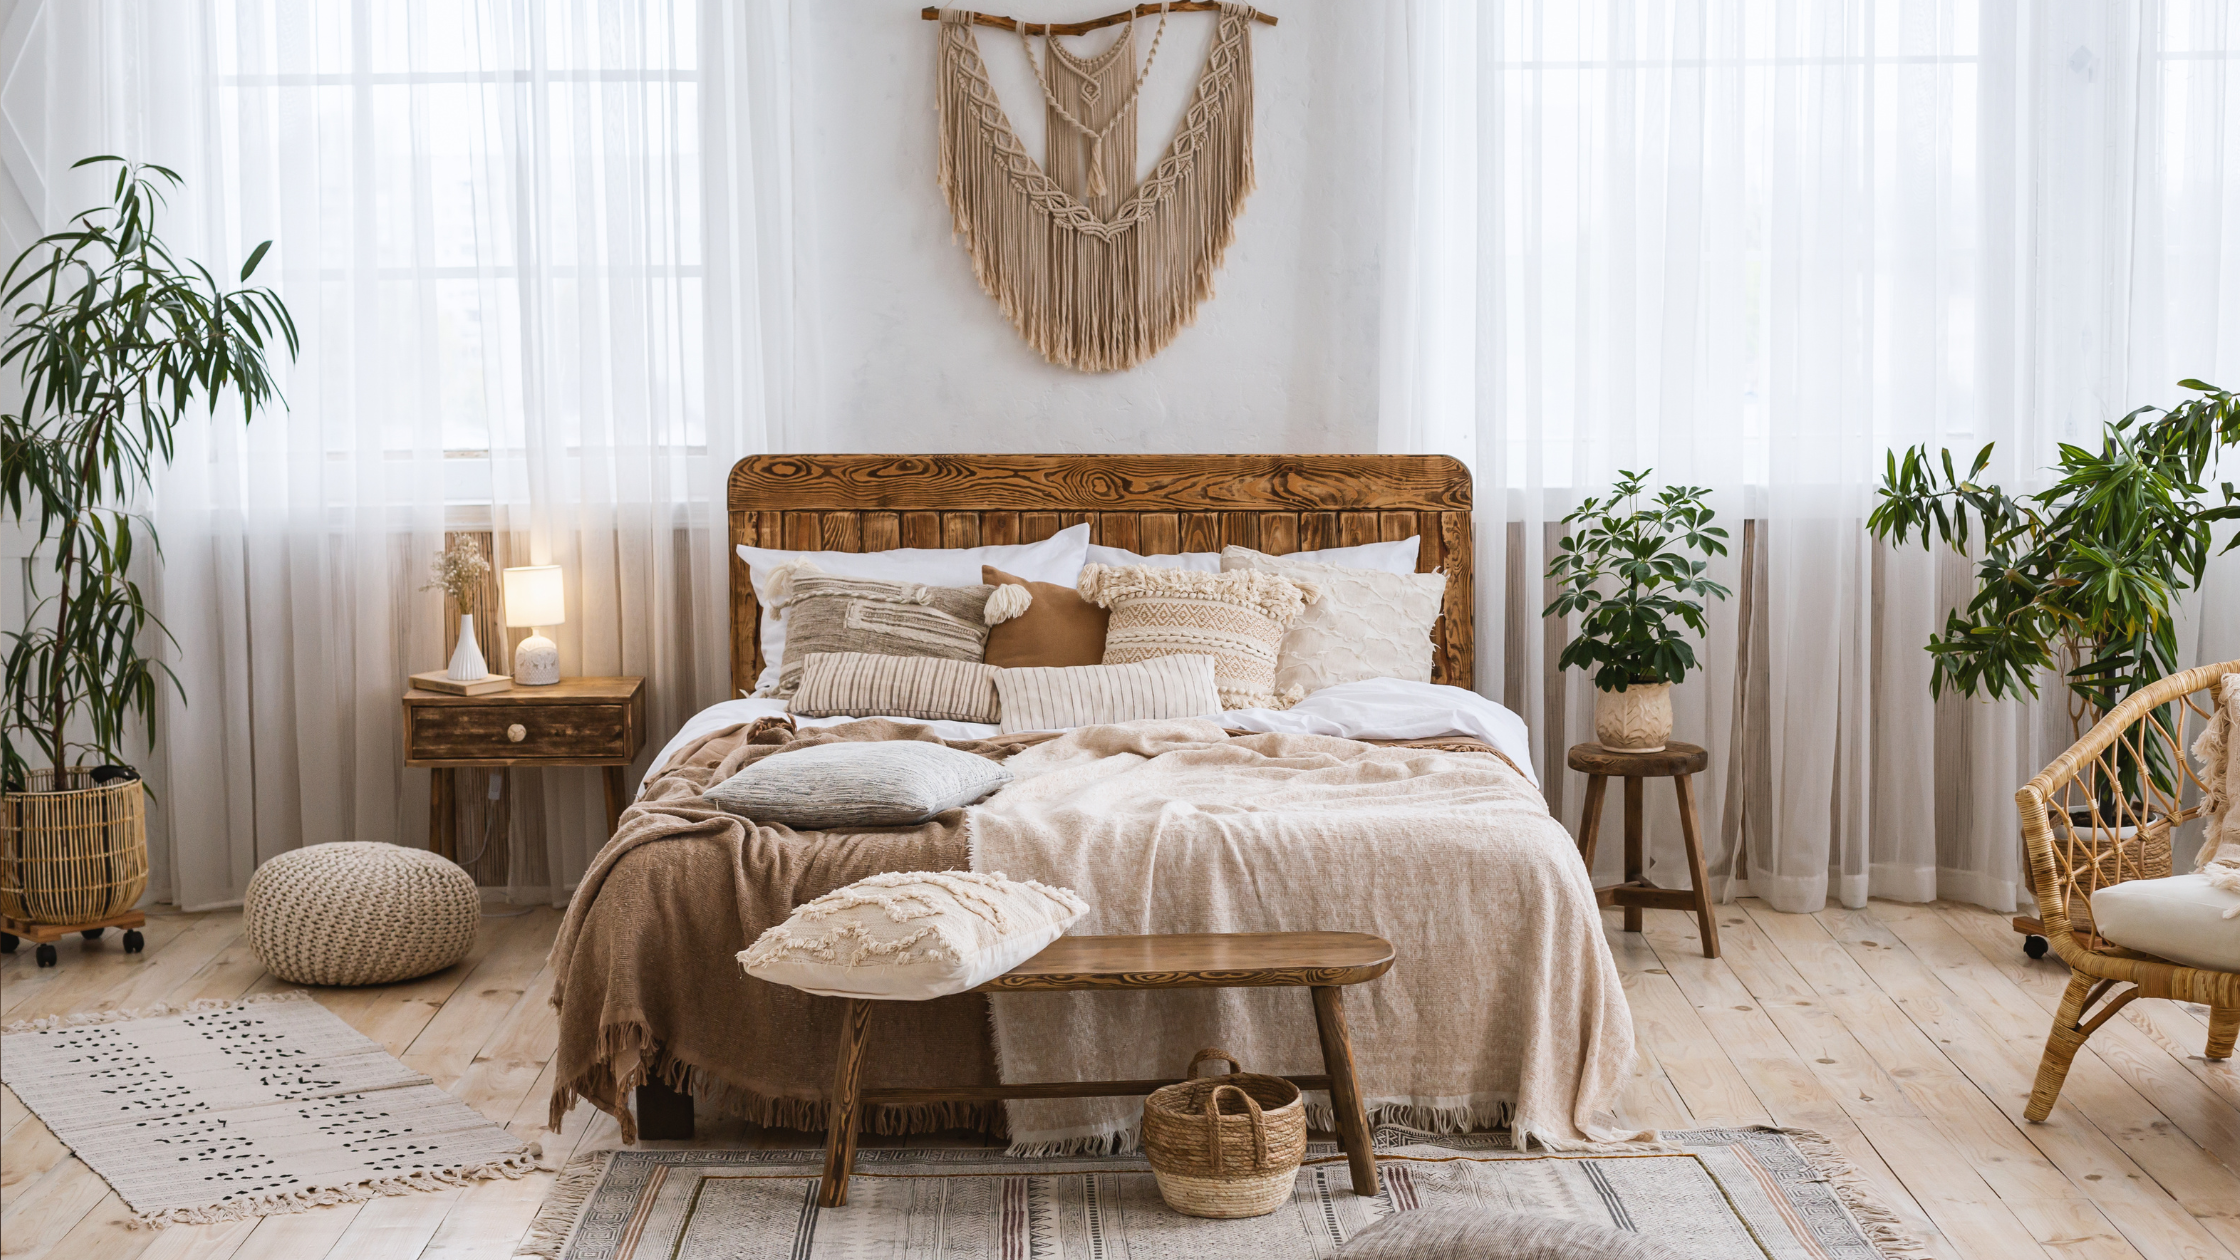 16 Ideas for a Cozy and Warm Rustic Home Decor